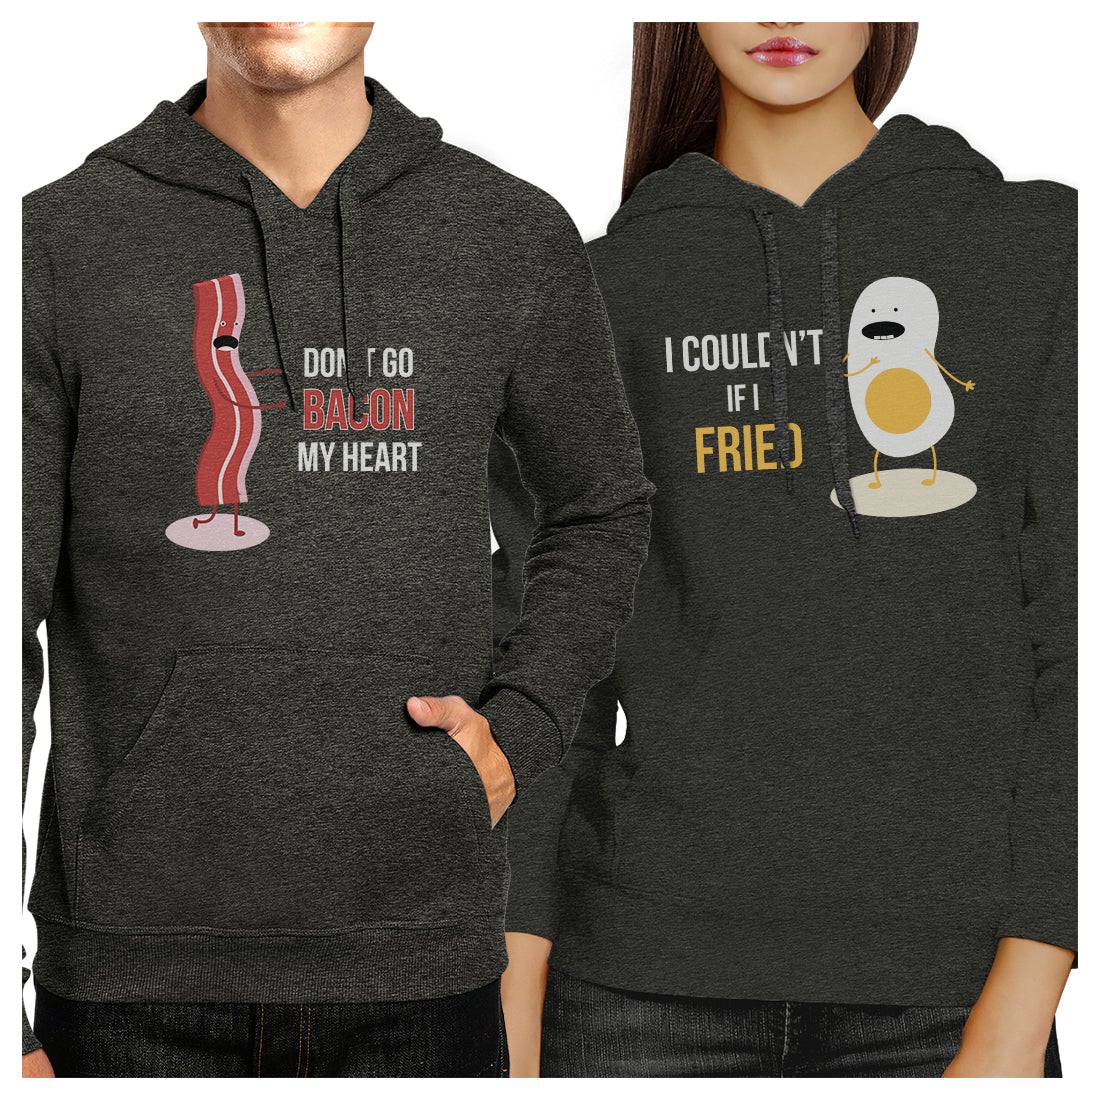 Bacon And Egg Matching Hoodies Pullover Funny Couples X-Mas Gifts Black